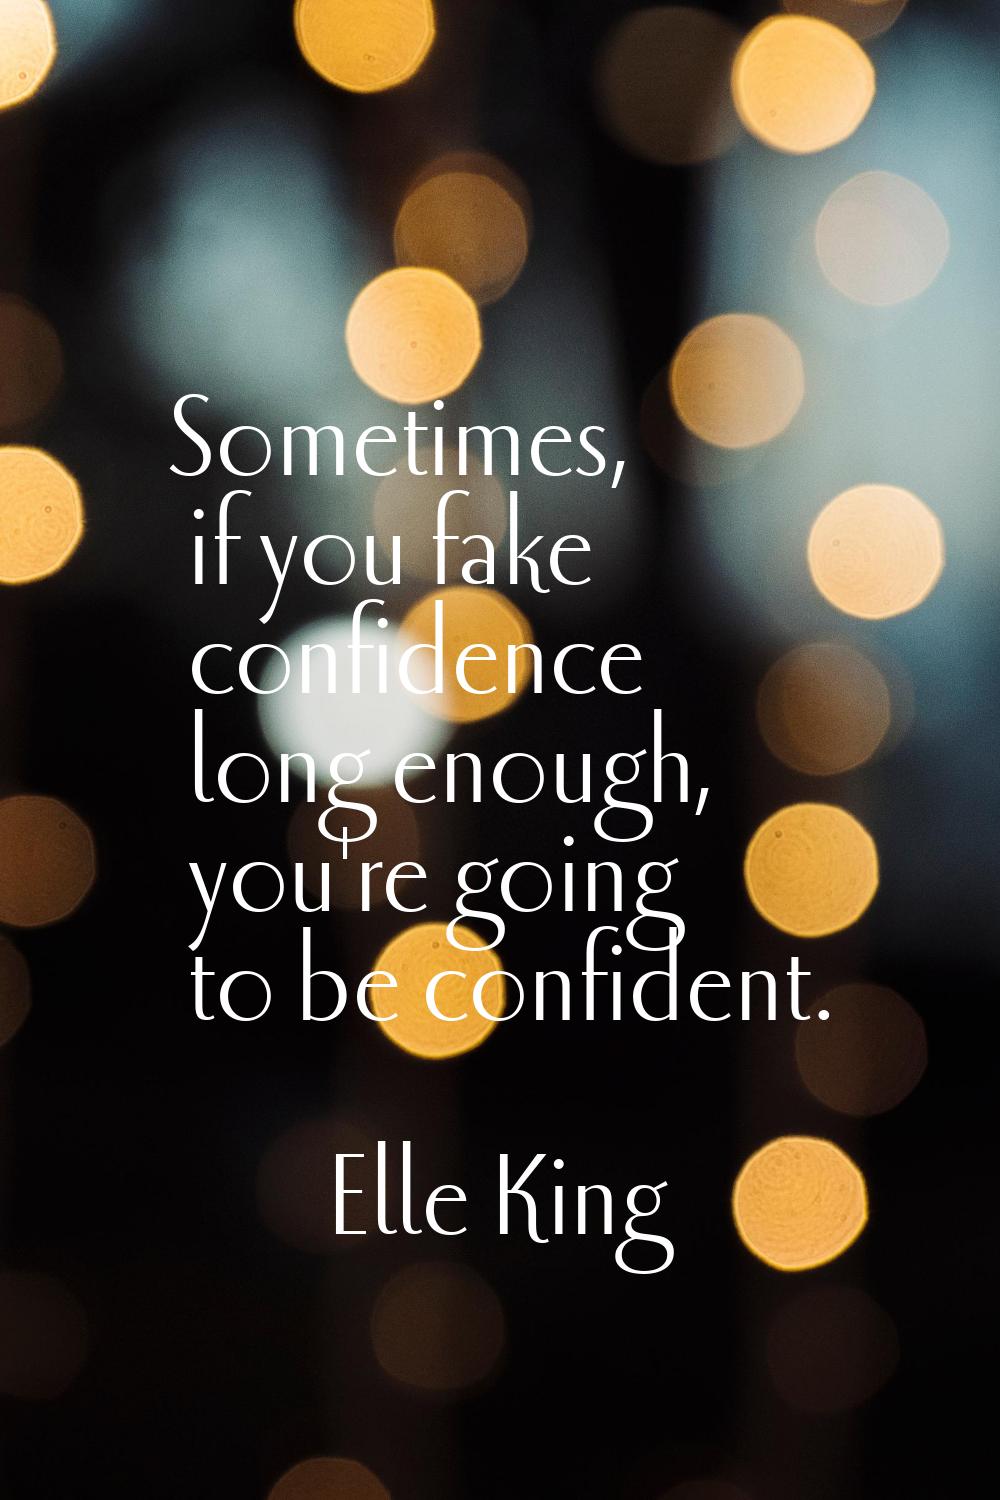 Sometimes, if you fake confidence long enough, you're going to be confident.